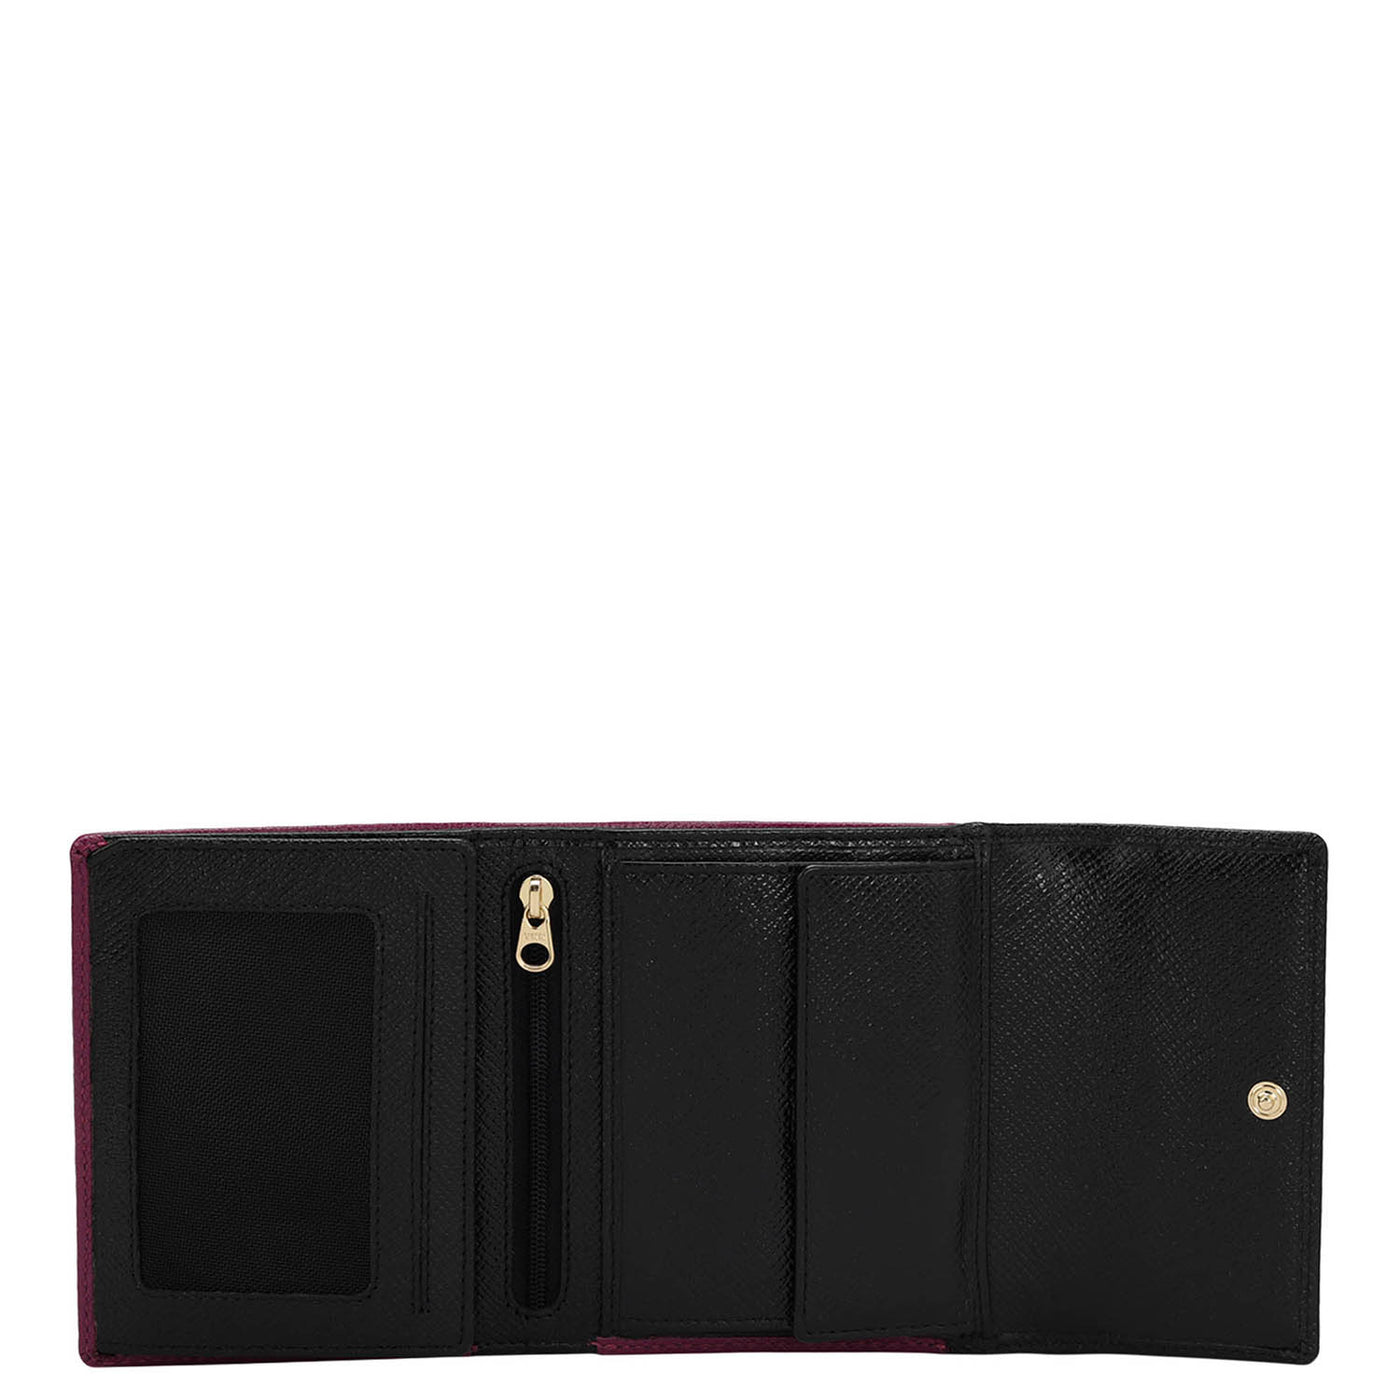 Franzy Leather Ladies Wallet - Orchid & Black